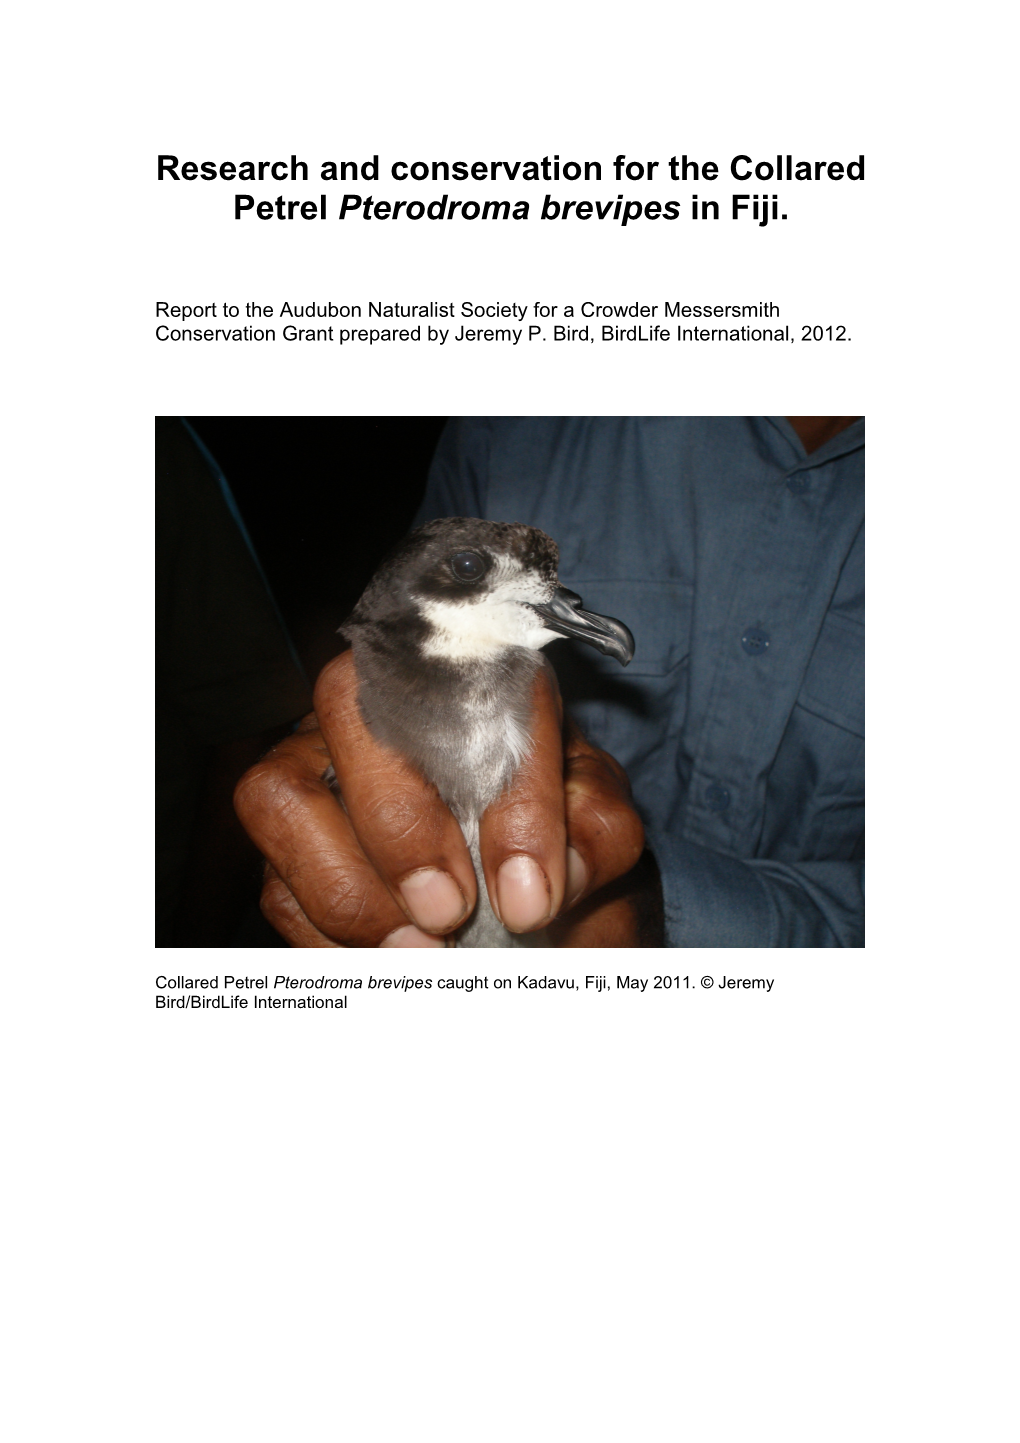 Research and Conservation for the Collared Petrel Pterodroma Brevipes in Fiji